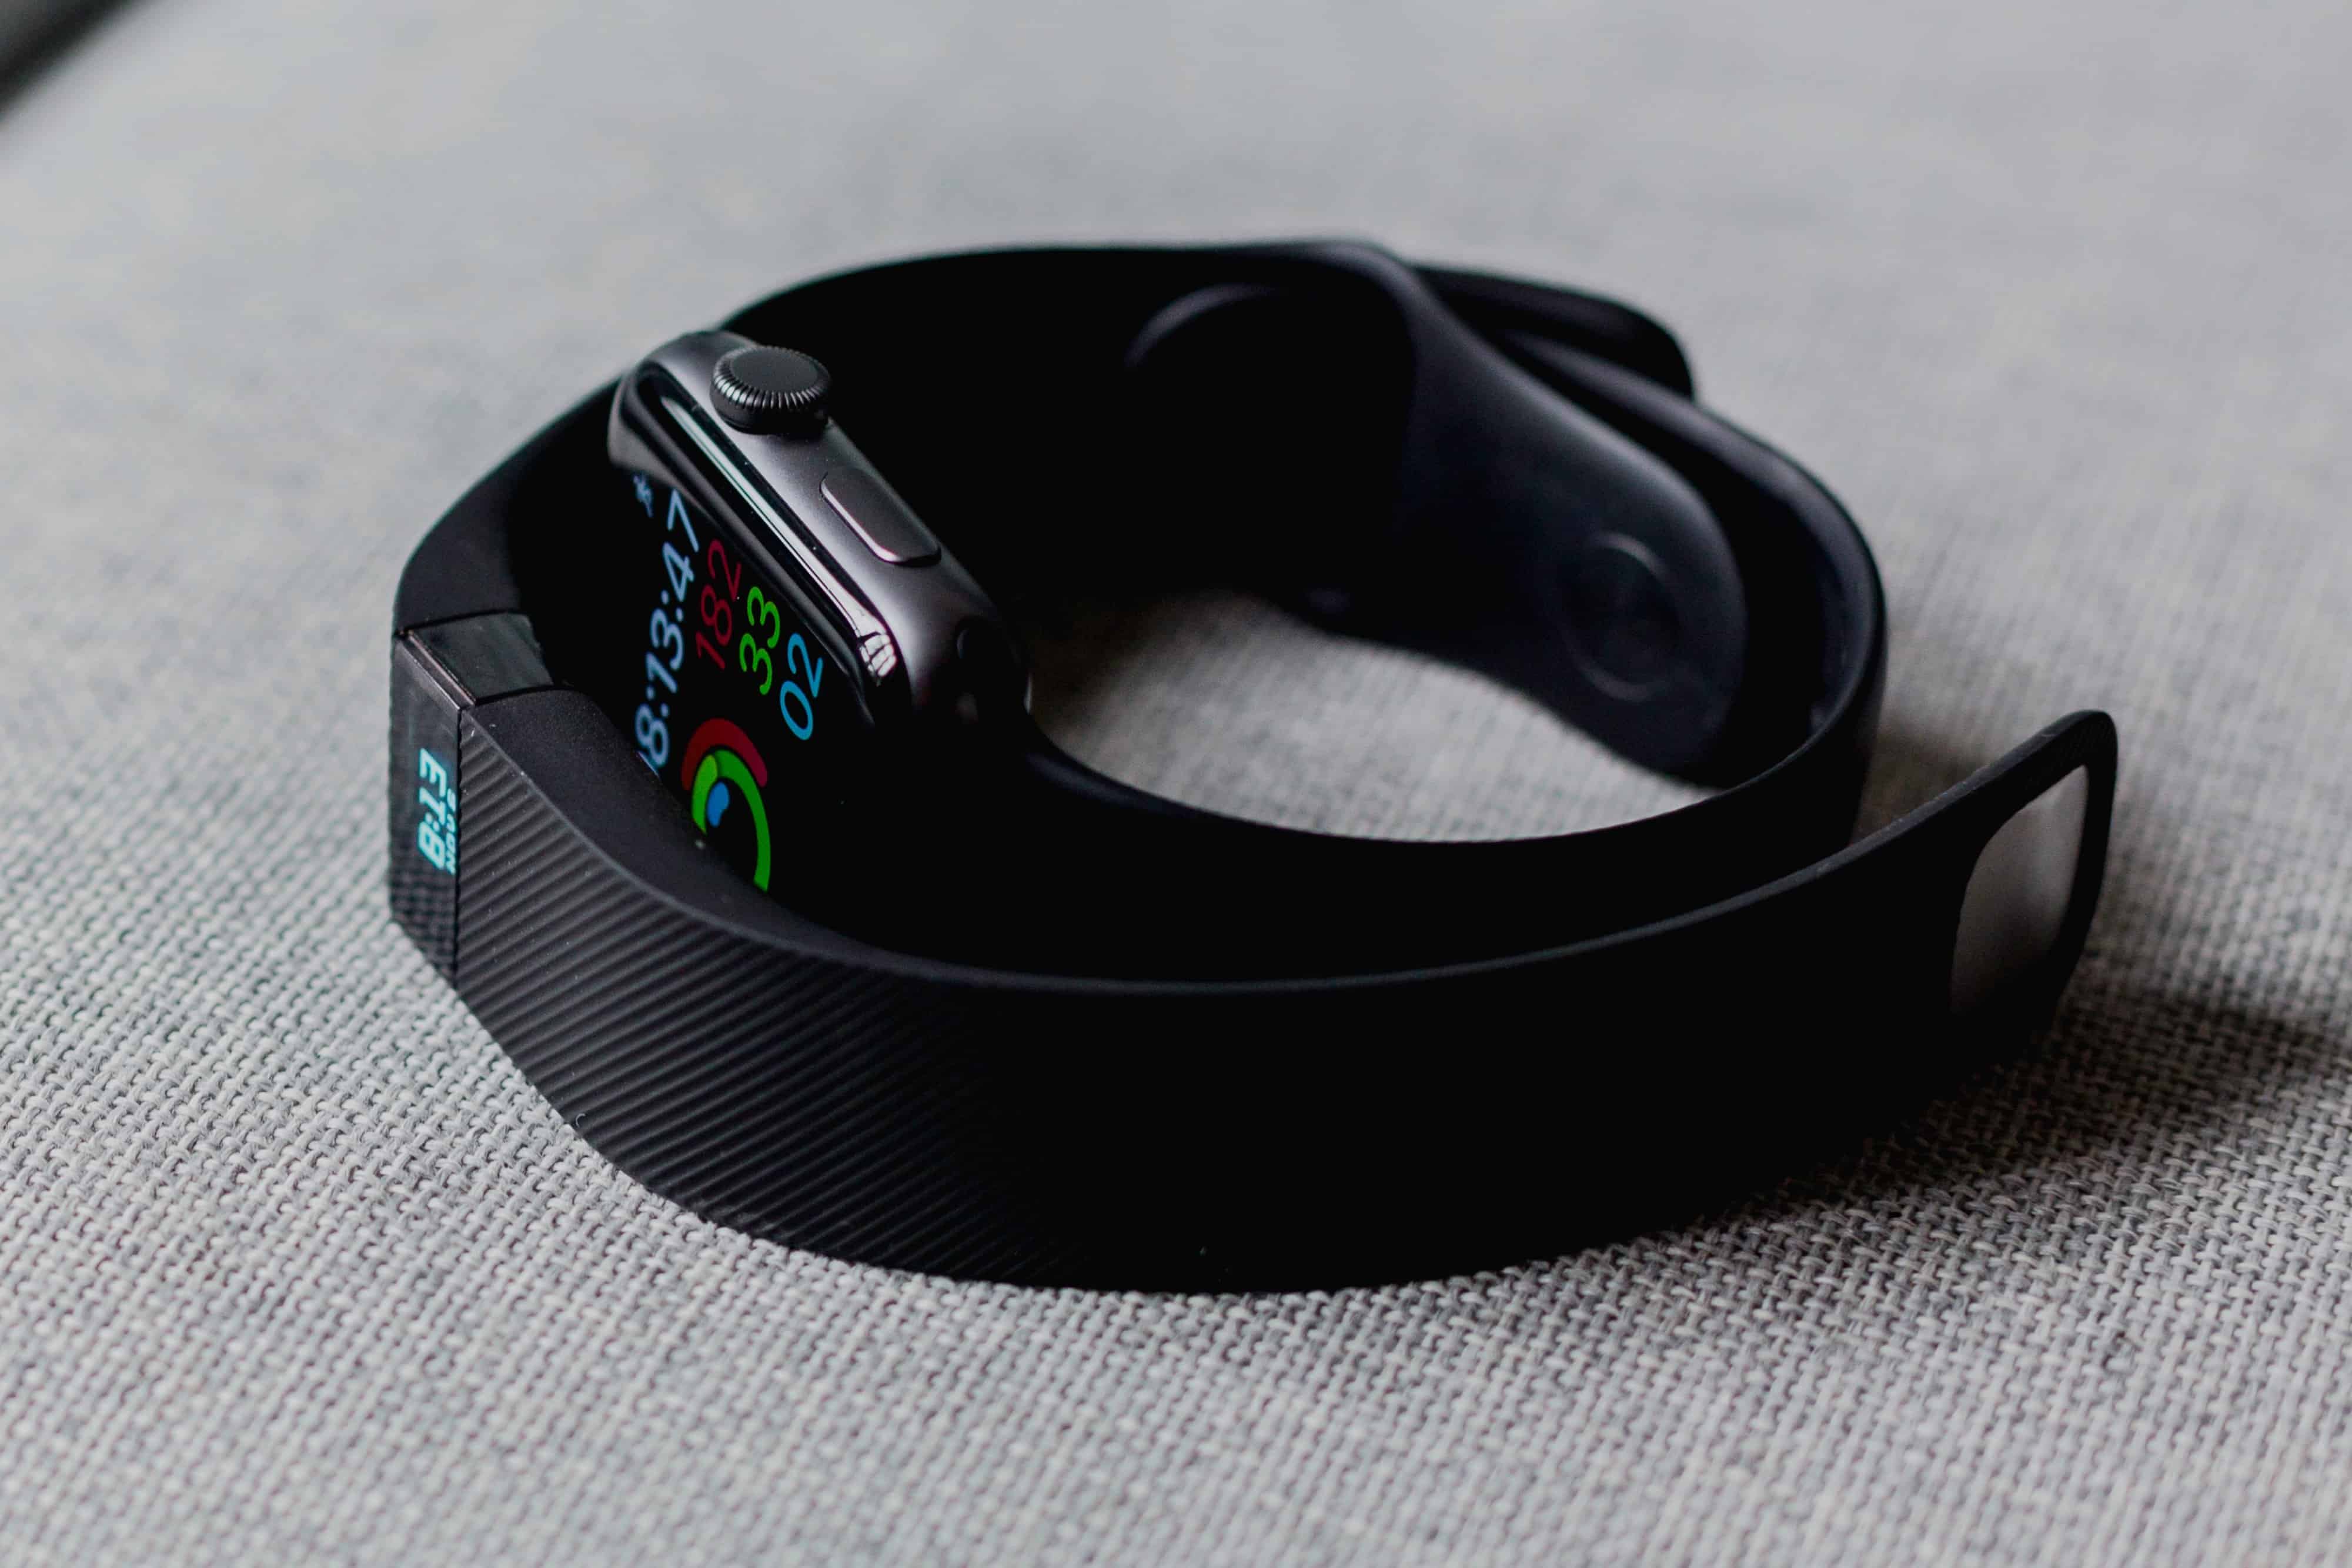 Text Messaging and Wearable Devices Make a Great Pairing in Clinical Research